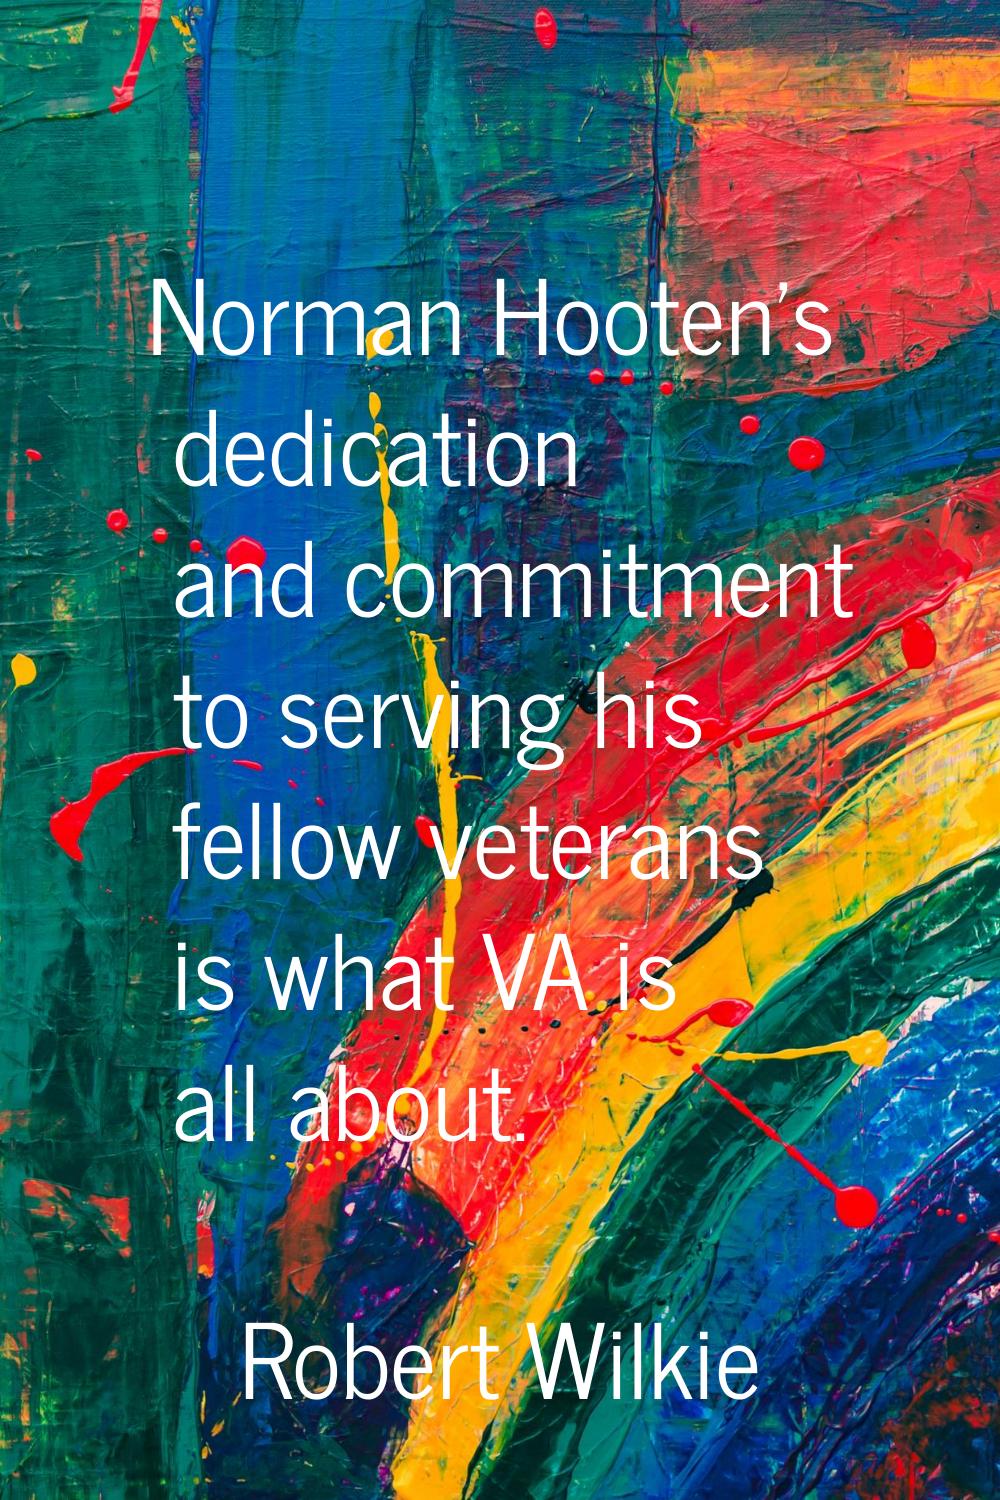 Norman Hooten's dedication and commitment to serving his fellow veterans is what VA is all about.